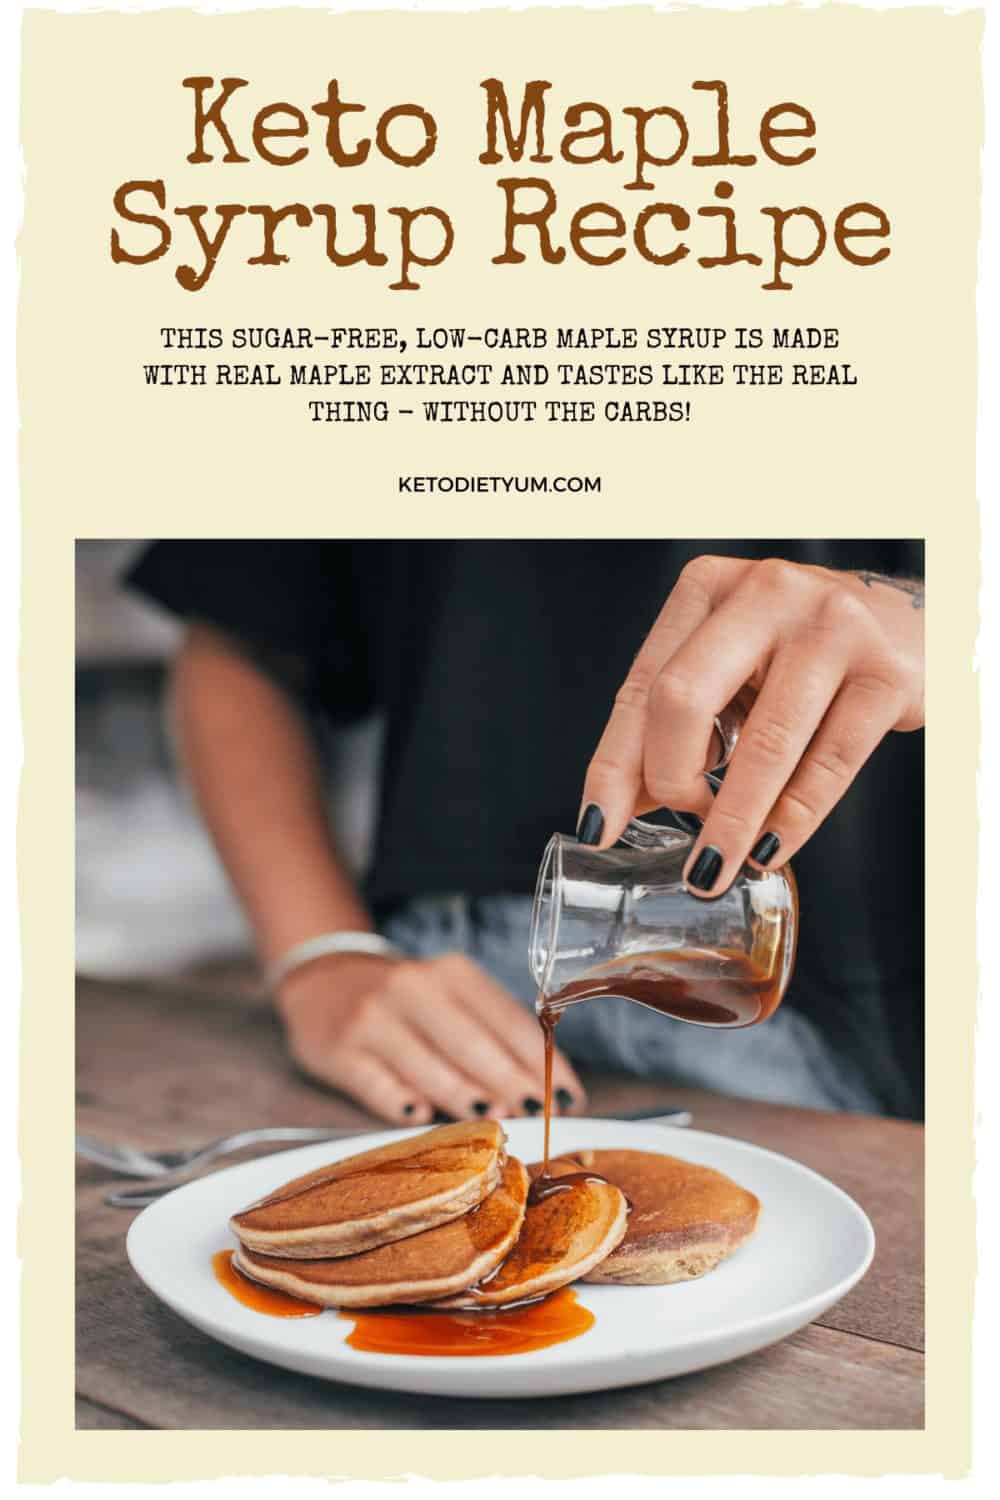 Craving maple syrup on the keto diet? This sugar-free, low-carb maple syrup is made with real maple extract and tastes like the real thing - without the carbs! A gluten-free, keto maple syrup that is ready in just 10 minutes that goes great with so many breakfast recipes! #lowcarbrecipes #ketosis #ketogenicdiet